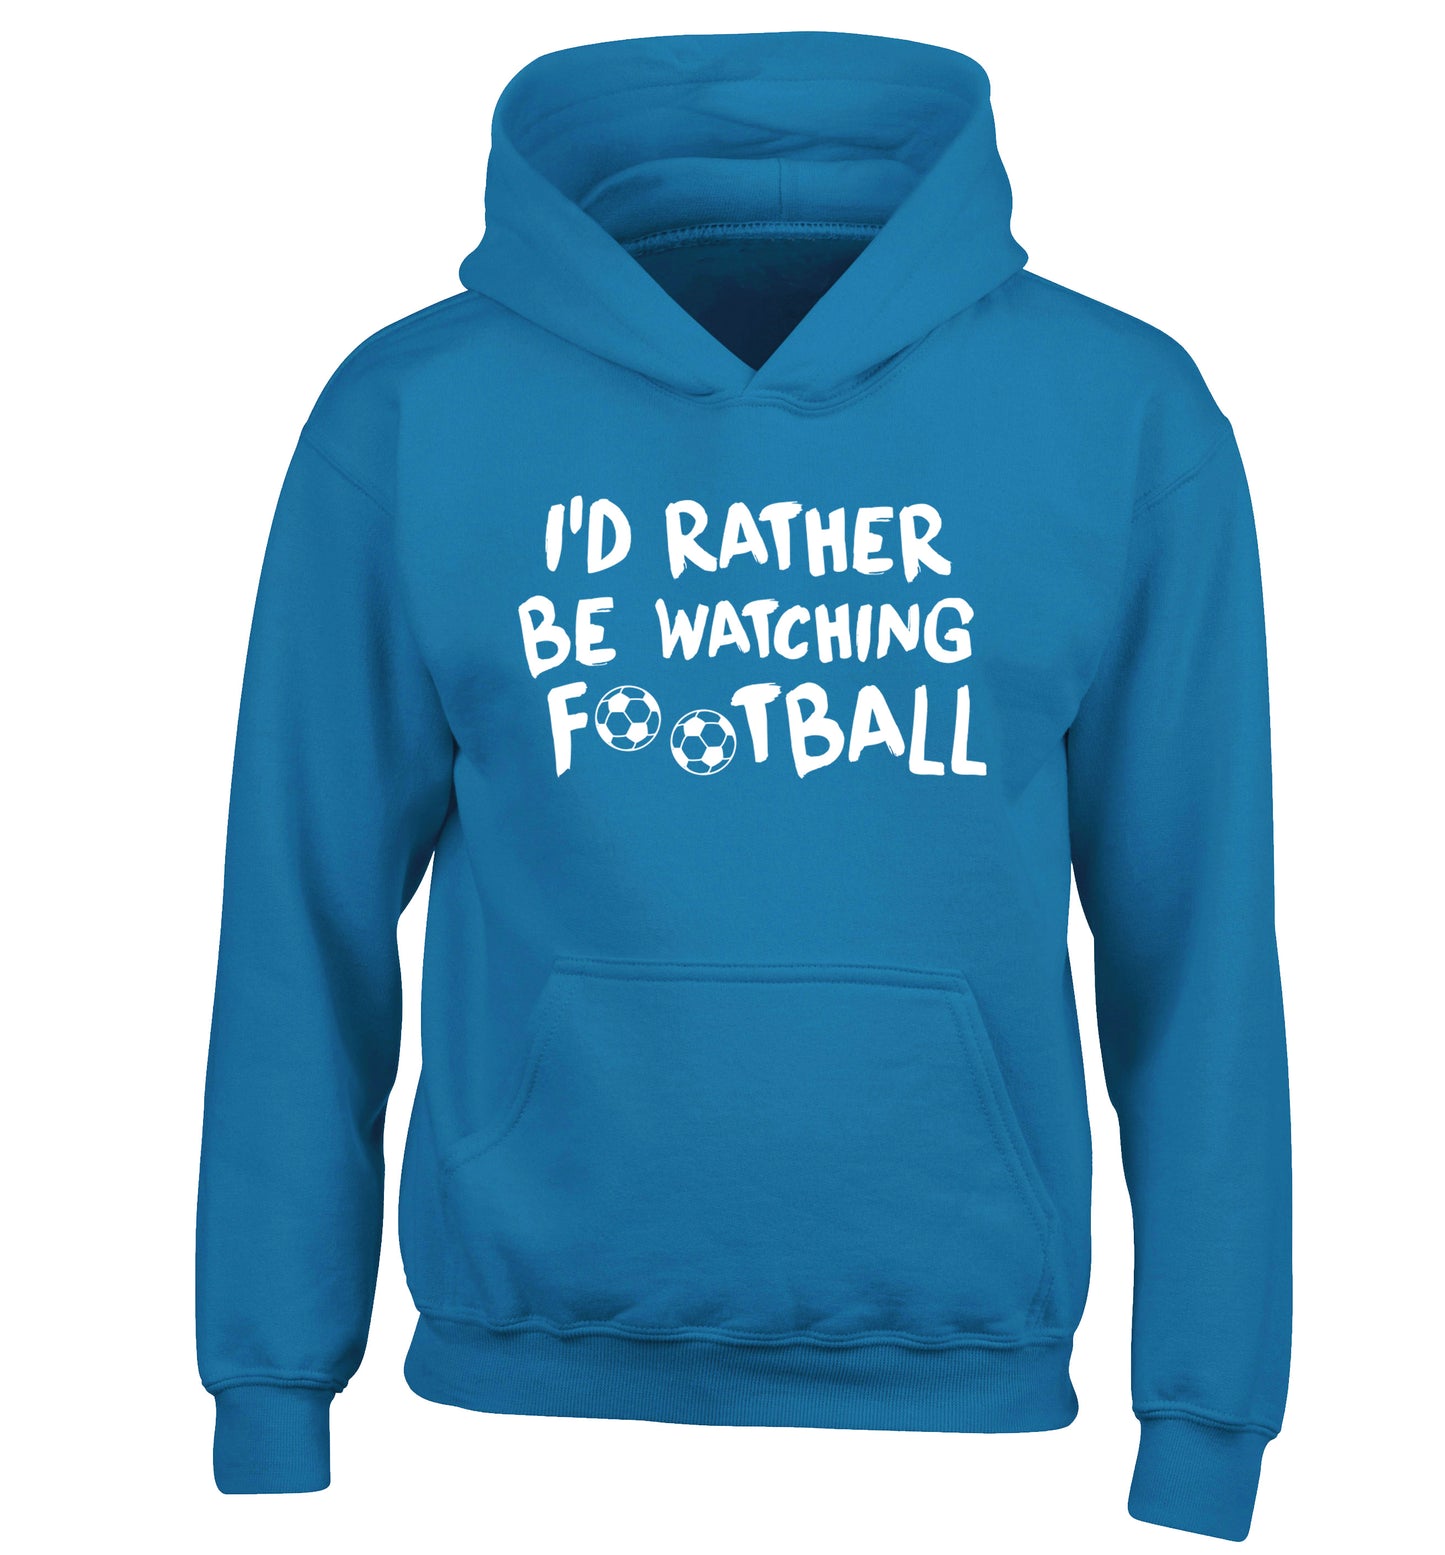 I'd rather be watching football children's blue hoodie 12-14 Years